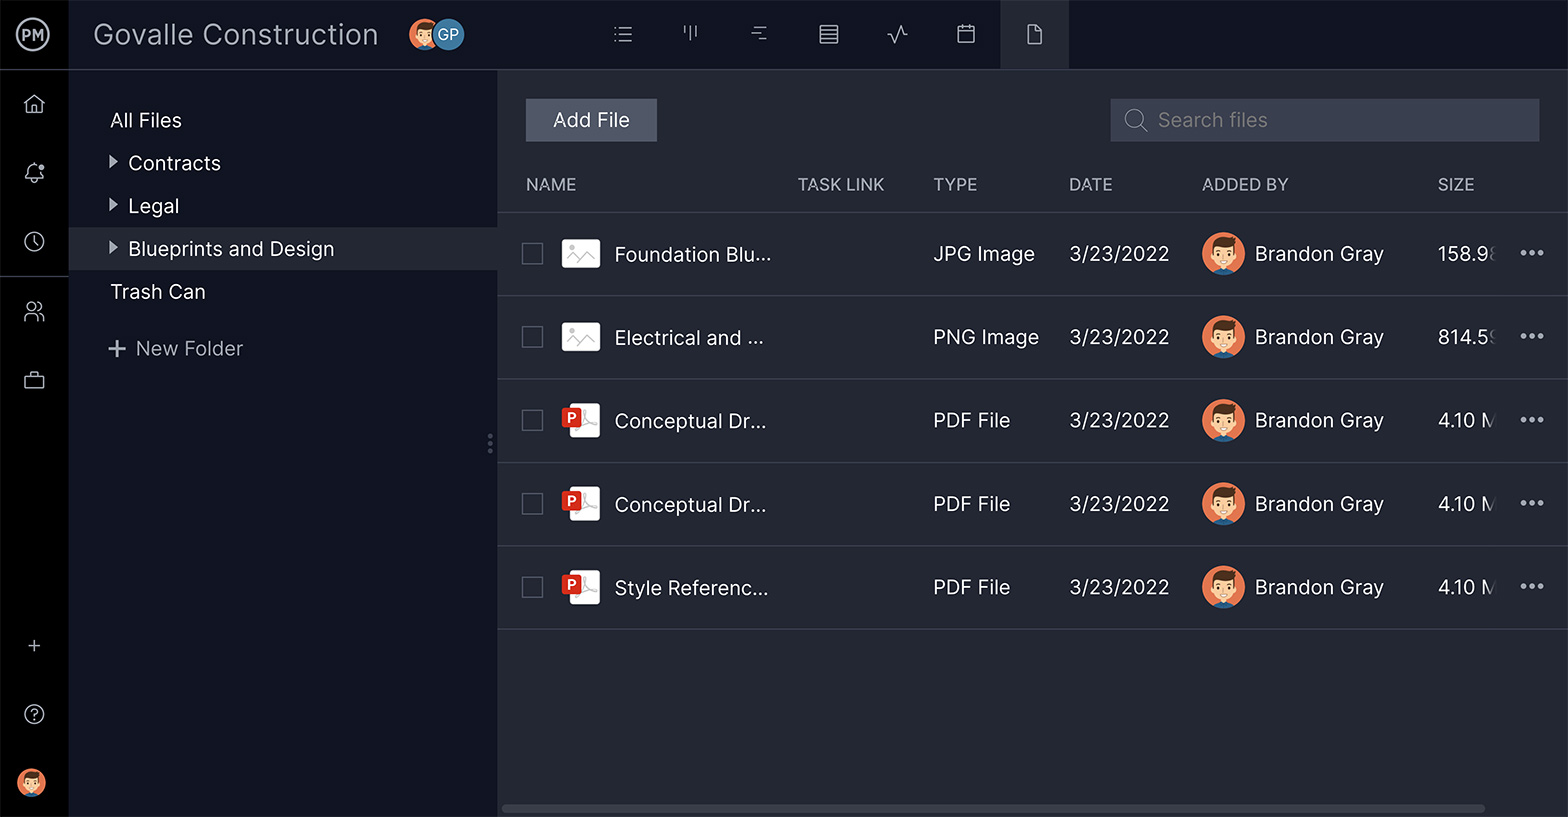 ProjectManager's unlimited file storage allows you to manage all your IT project management files as shown in the image